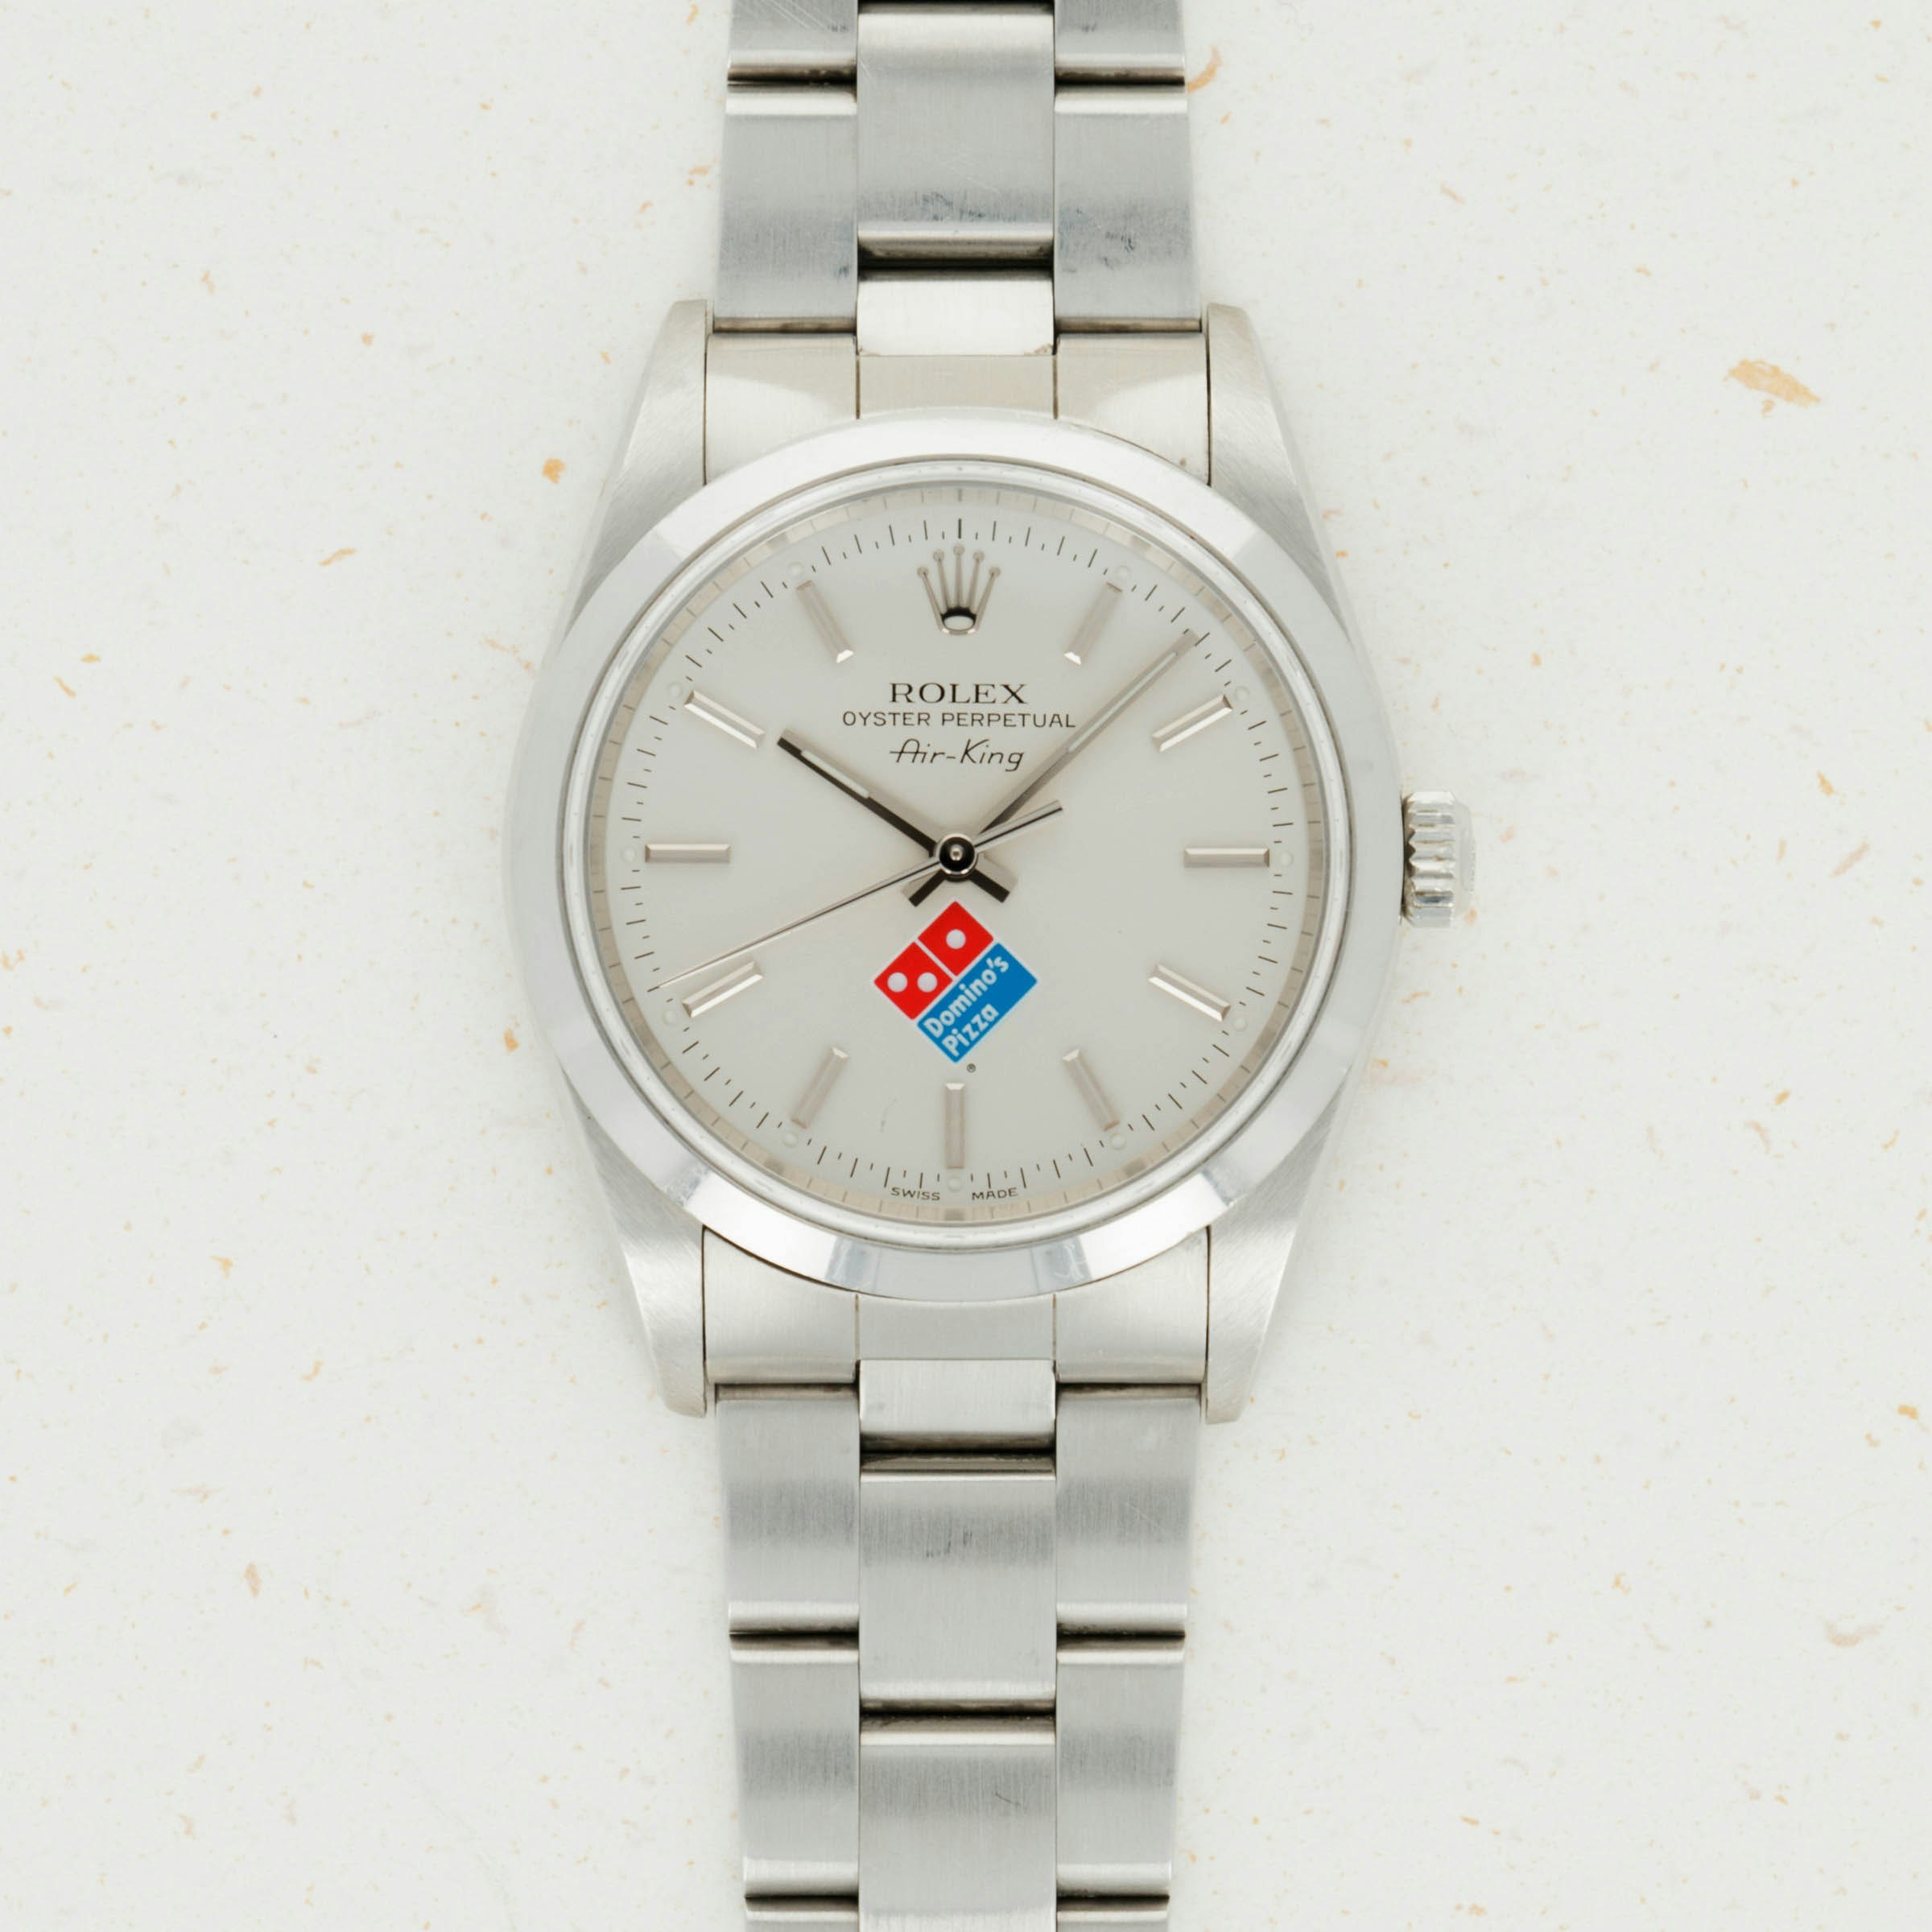 Thumbnail for Rolex Domino's Air-King 14000